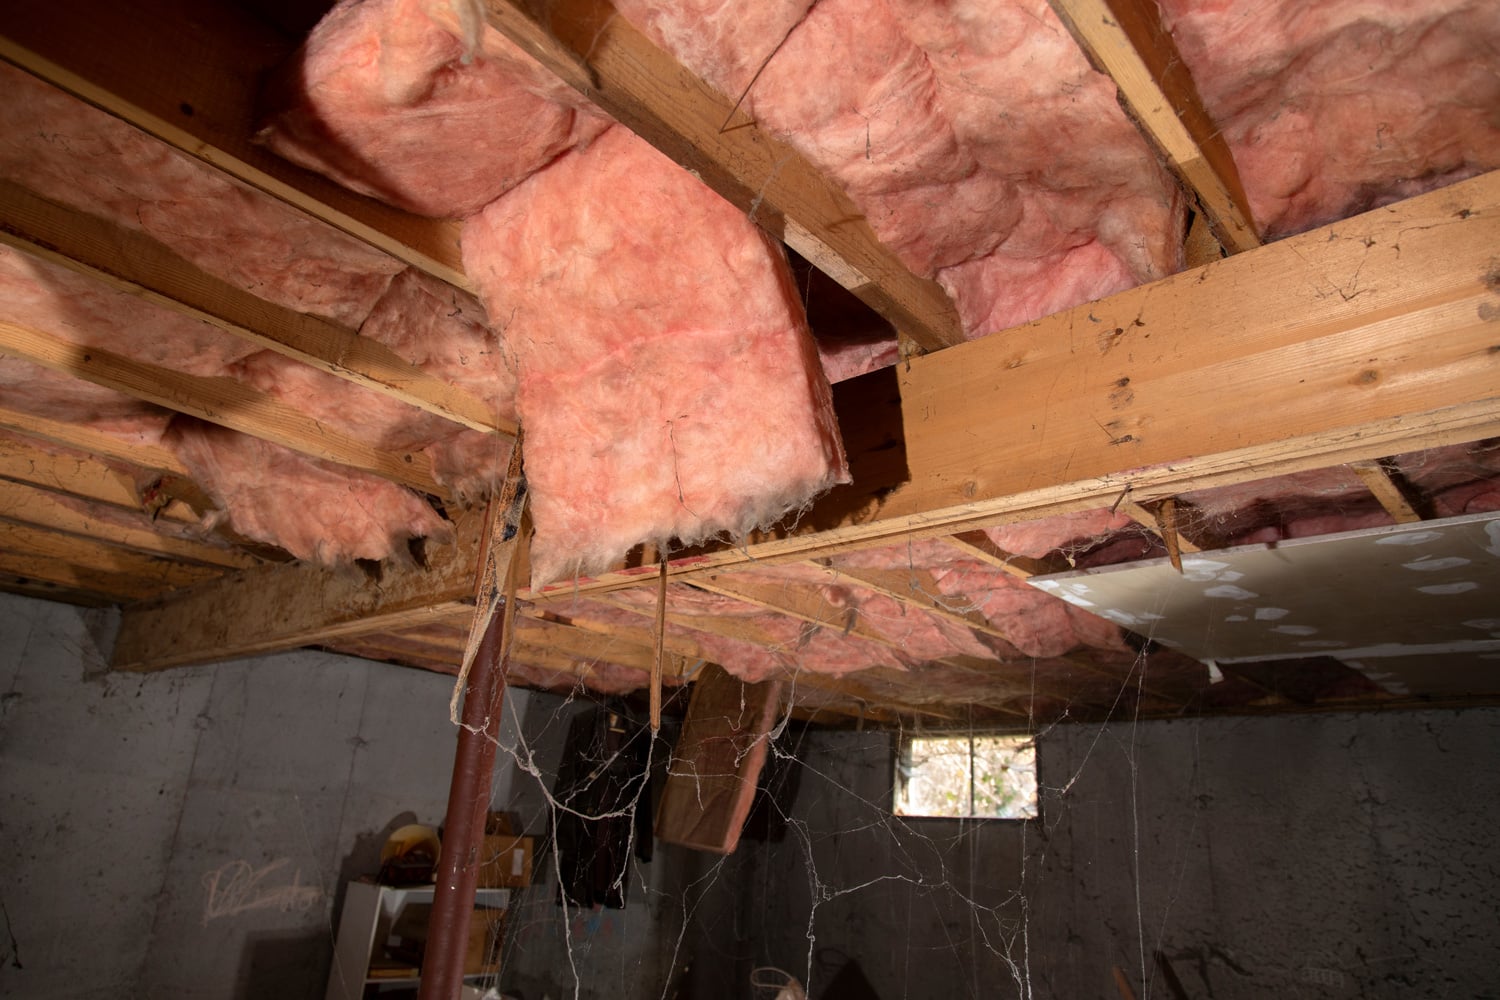 How To Clean Up Fiberglass Insulation